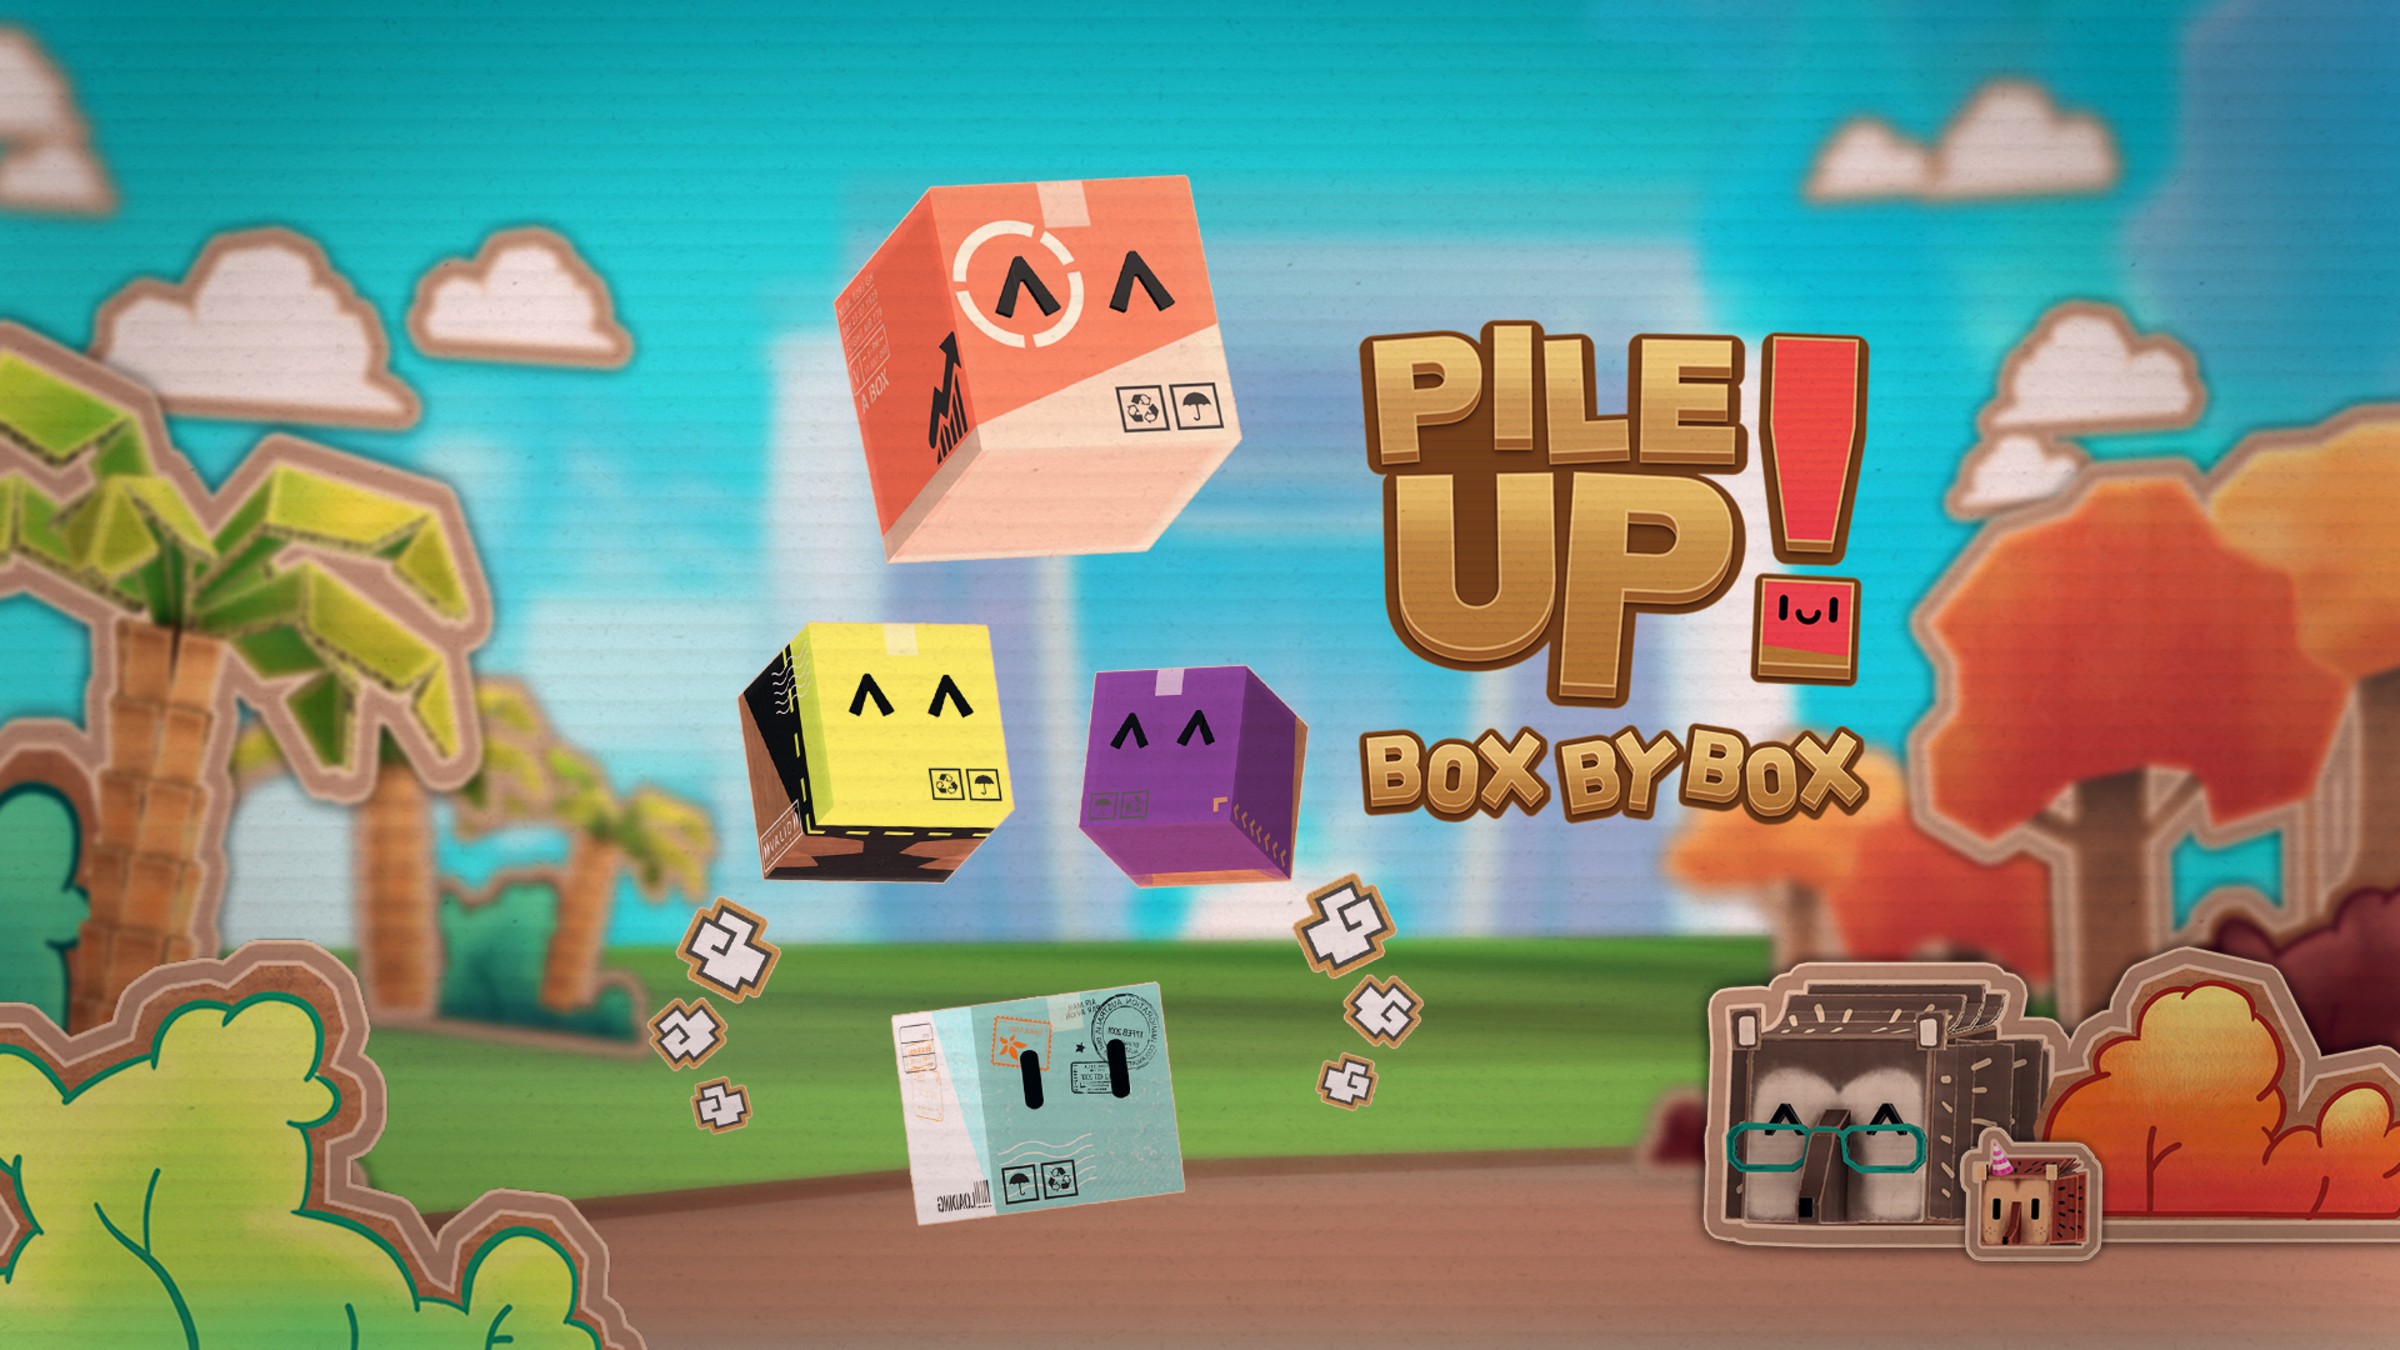 Pile Up! Box by Box for Nintendo Switch - Nintendo Official Site